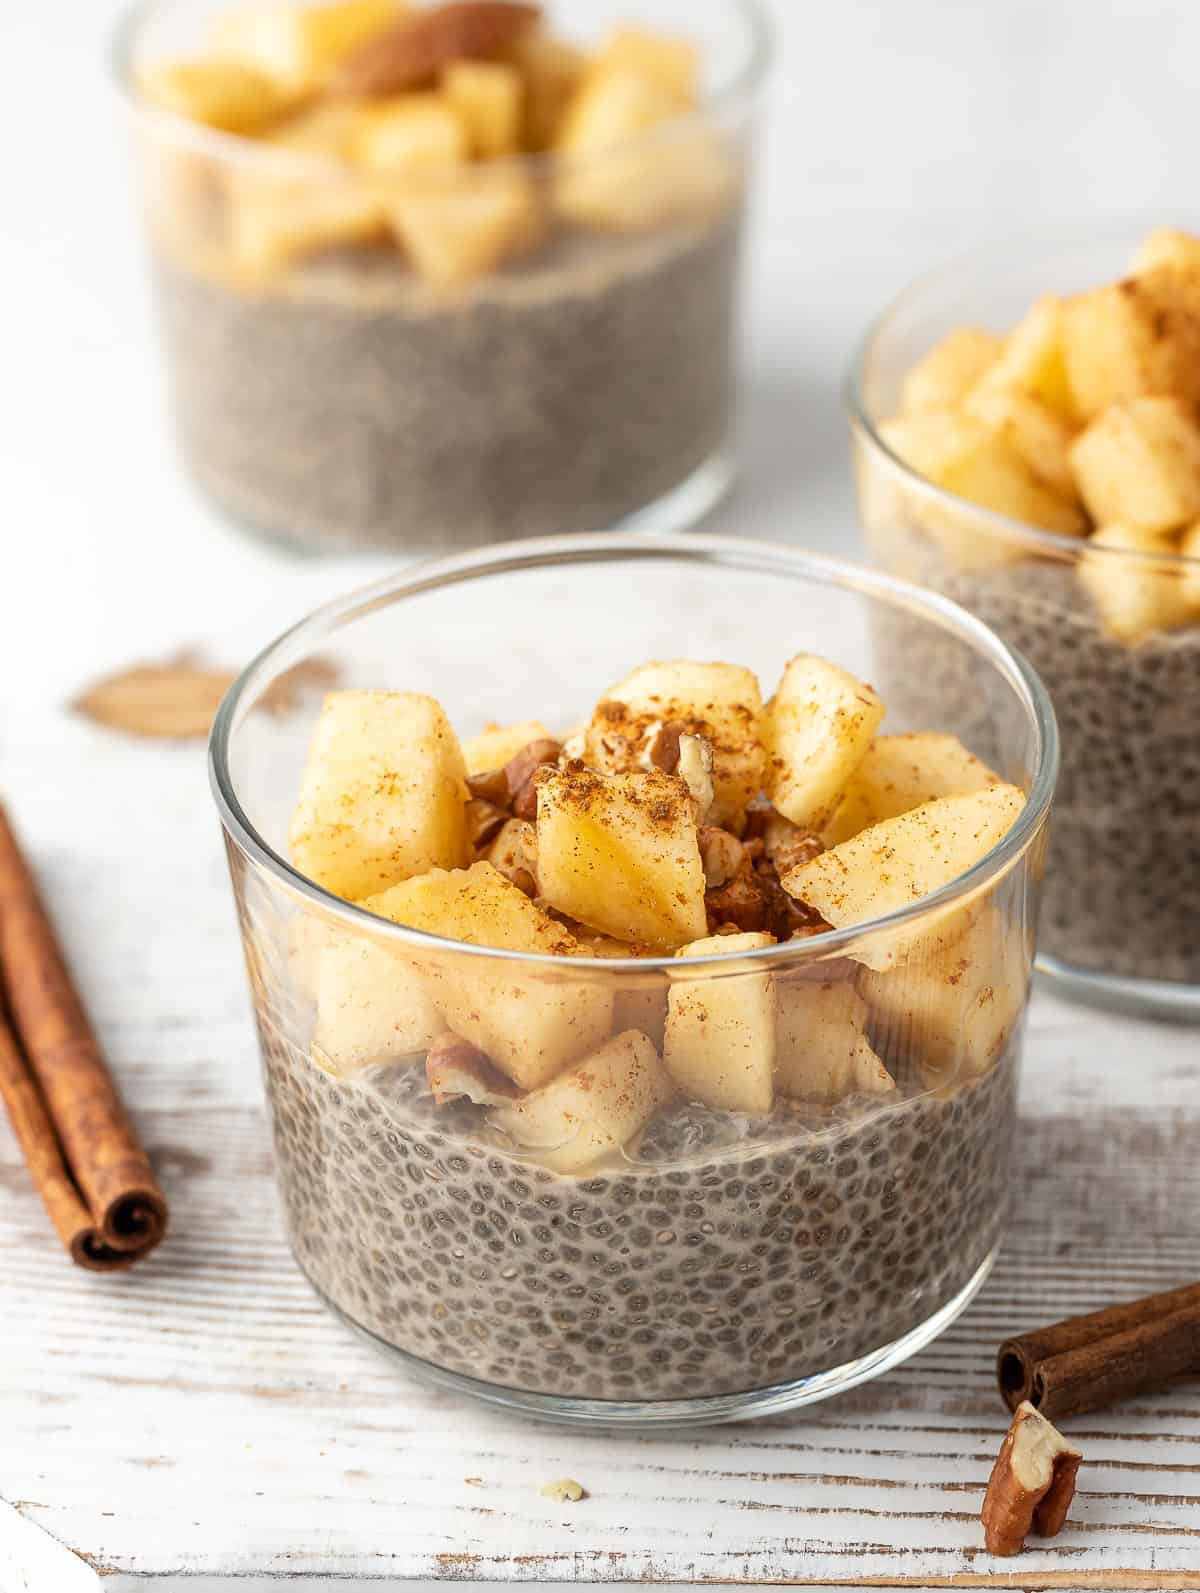 Overnight Chia Pudding topped with apples and cinnamon sticks on the side of the bowl.